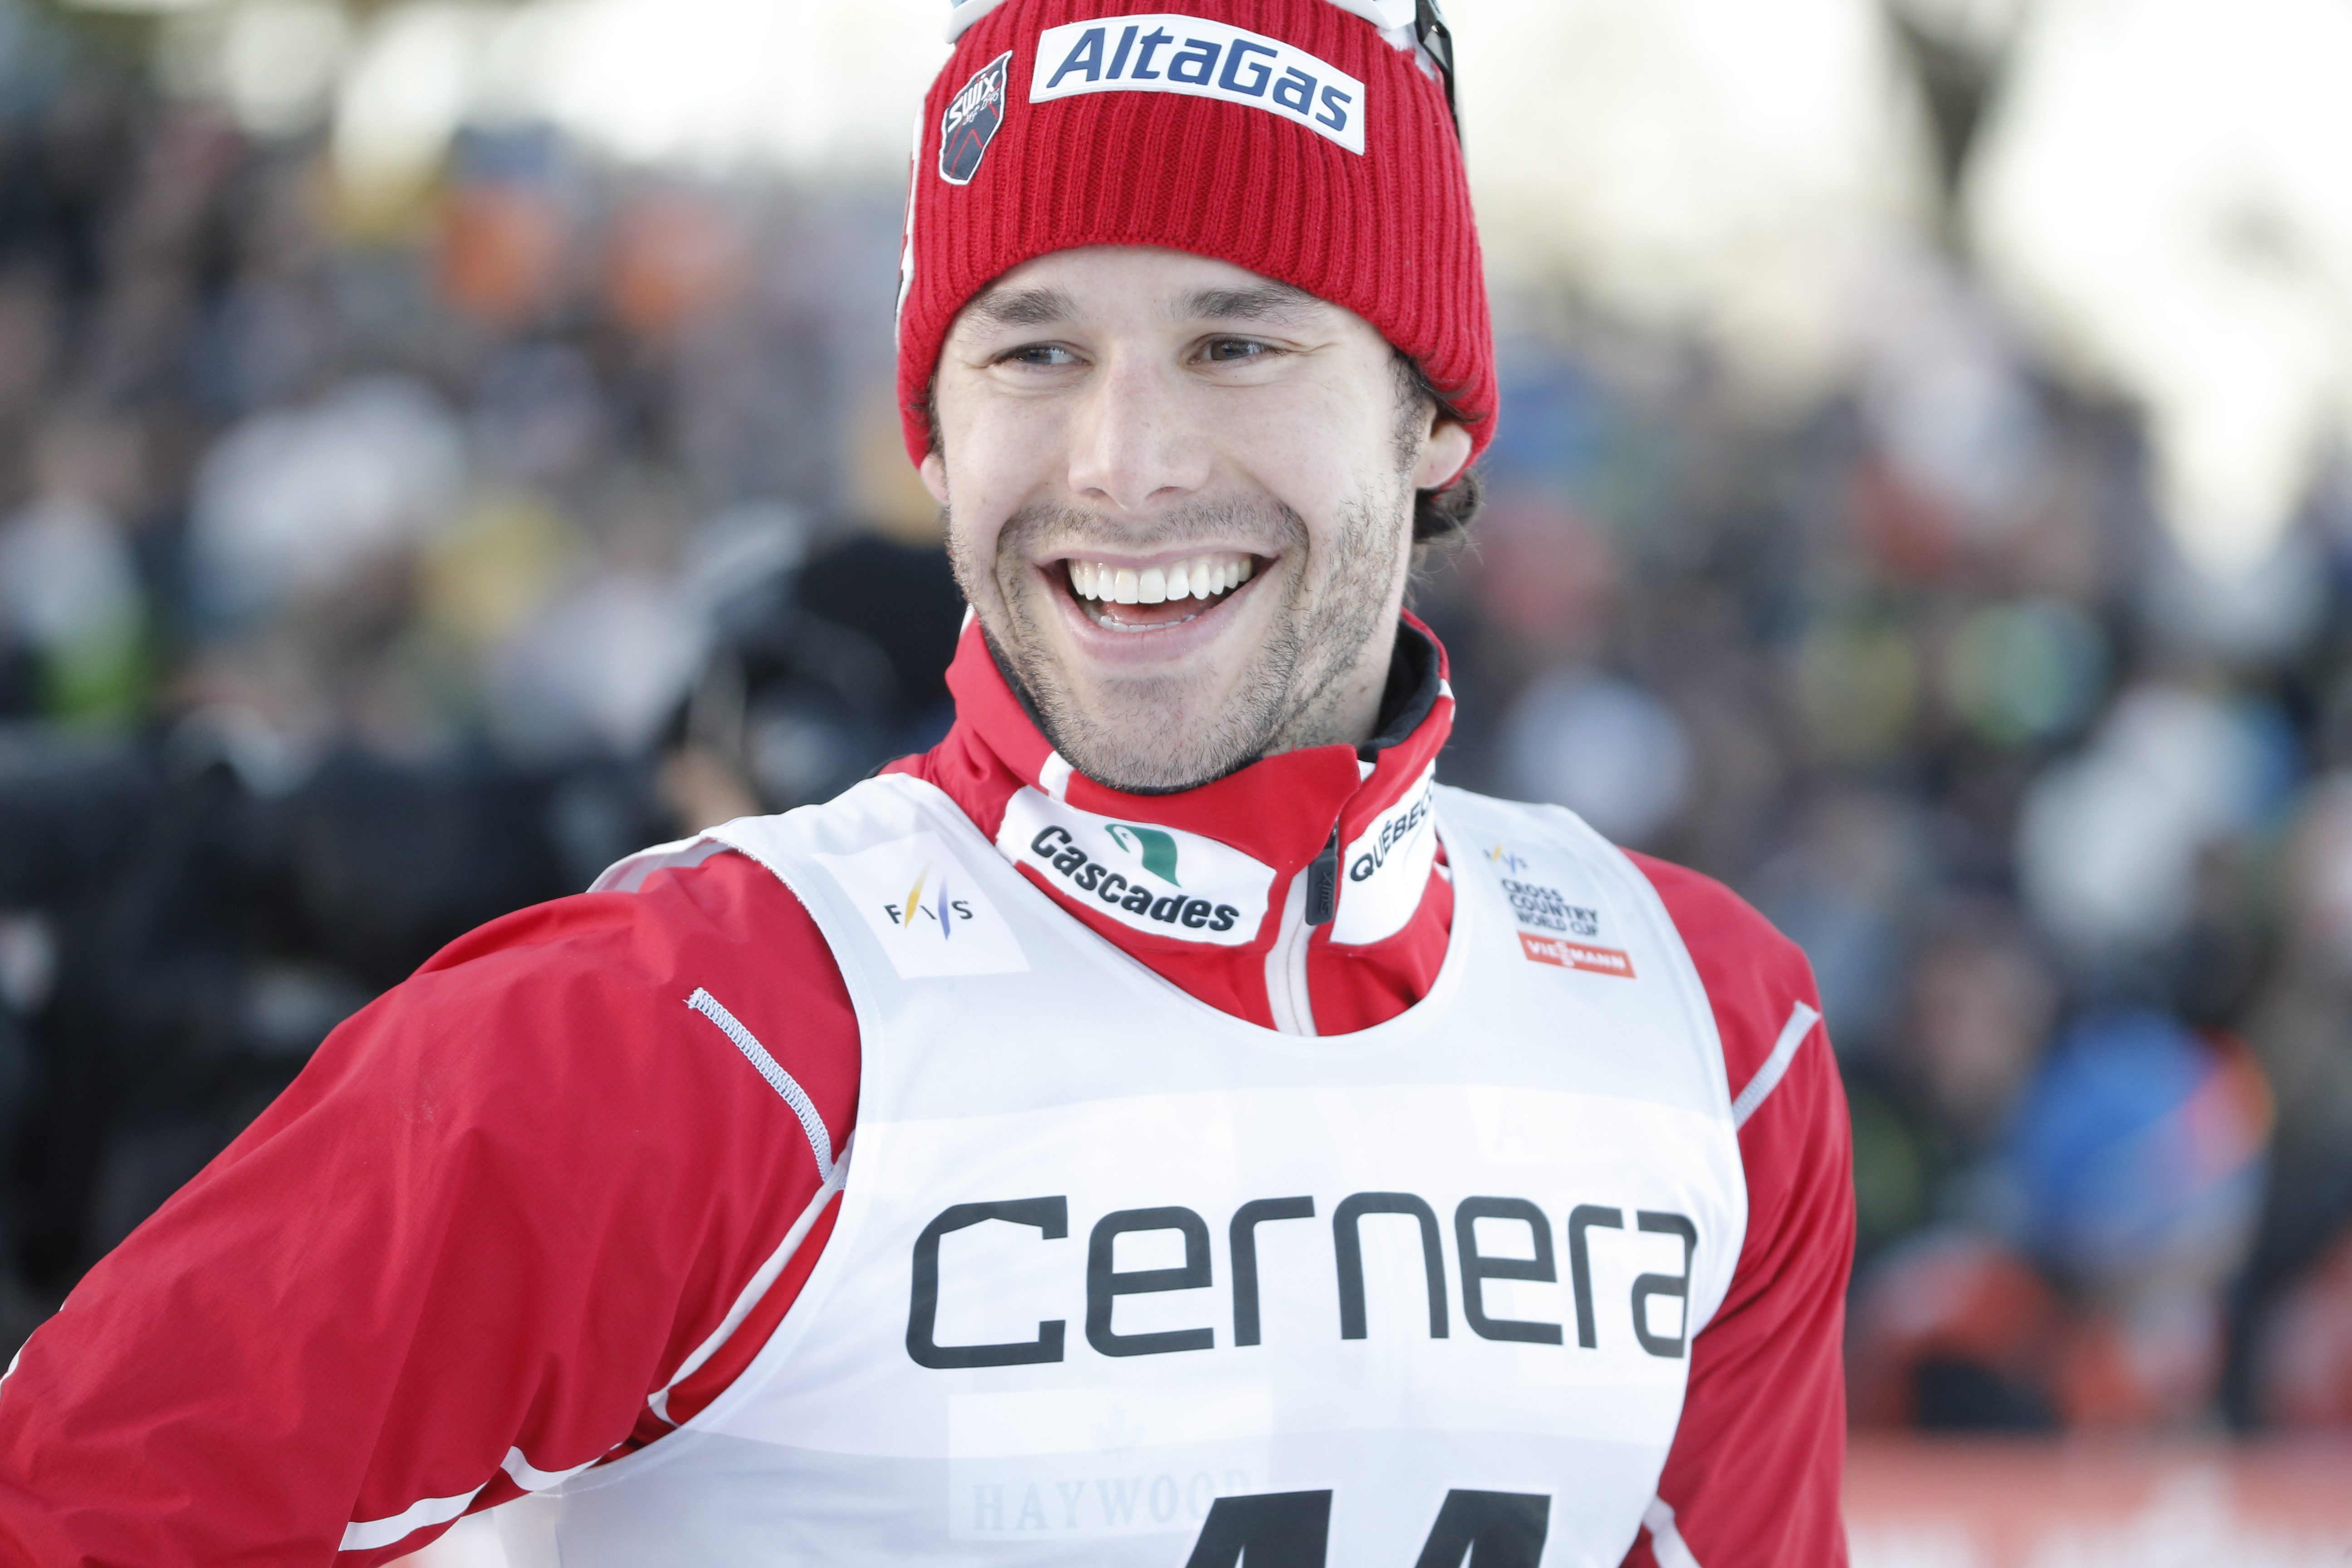 Alex Harvey of Canada reacts after crossing the finish line to win the men's 15km free style competition at the FIS Cross Country skiing World Cup event in Ulricehamn, Sweden, Saturday Jan. 21, 2017. (Adam Ihse / TT via AP)